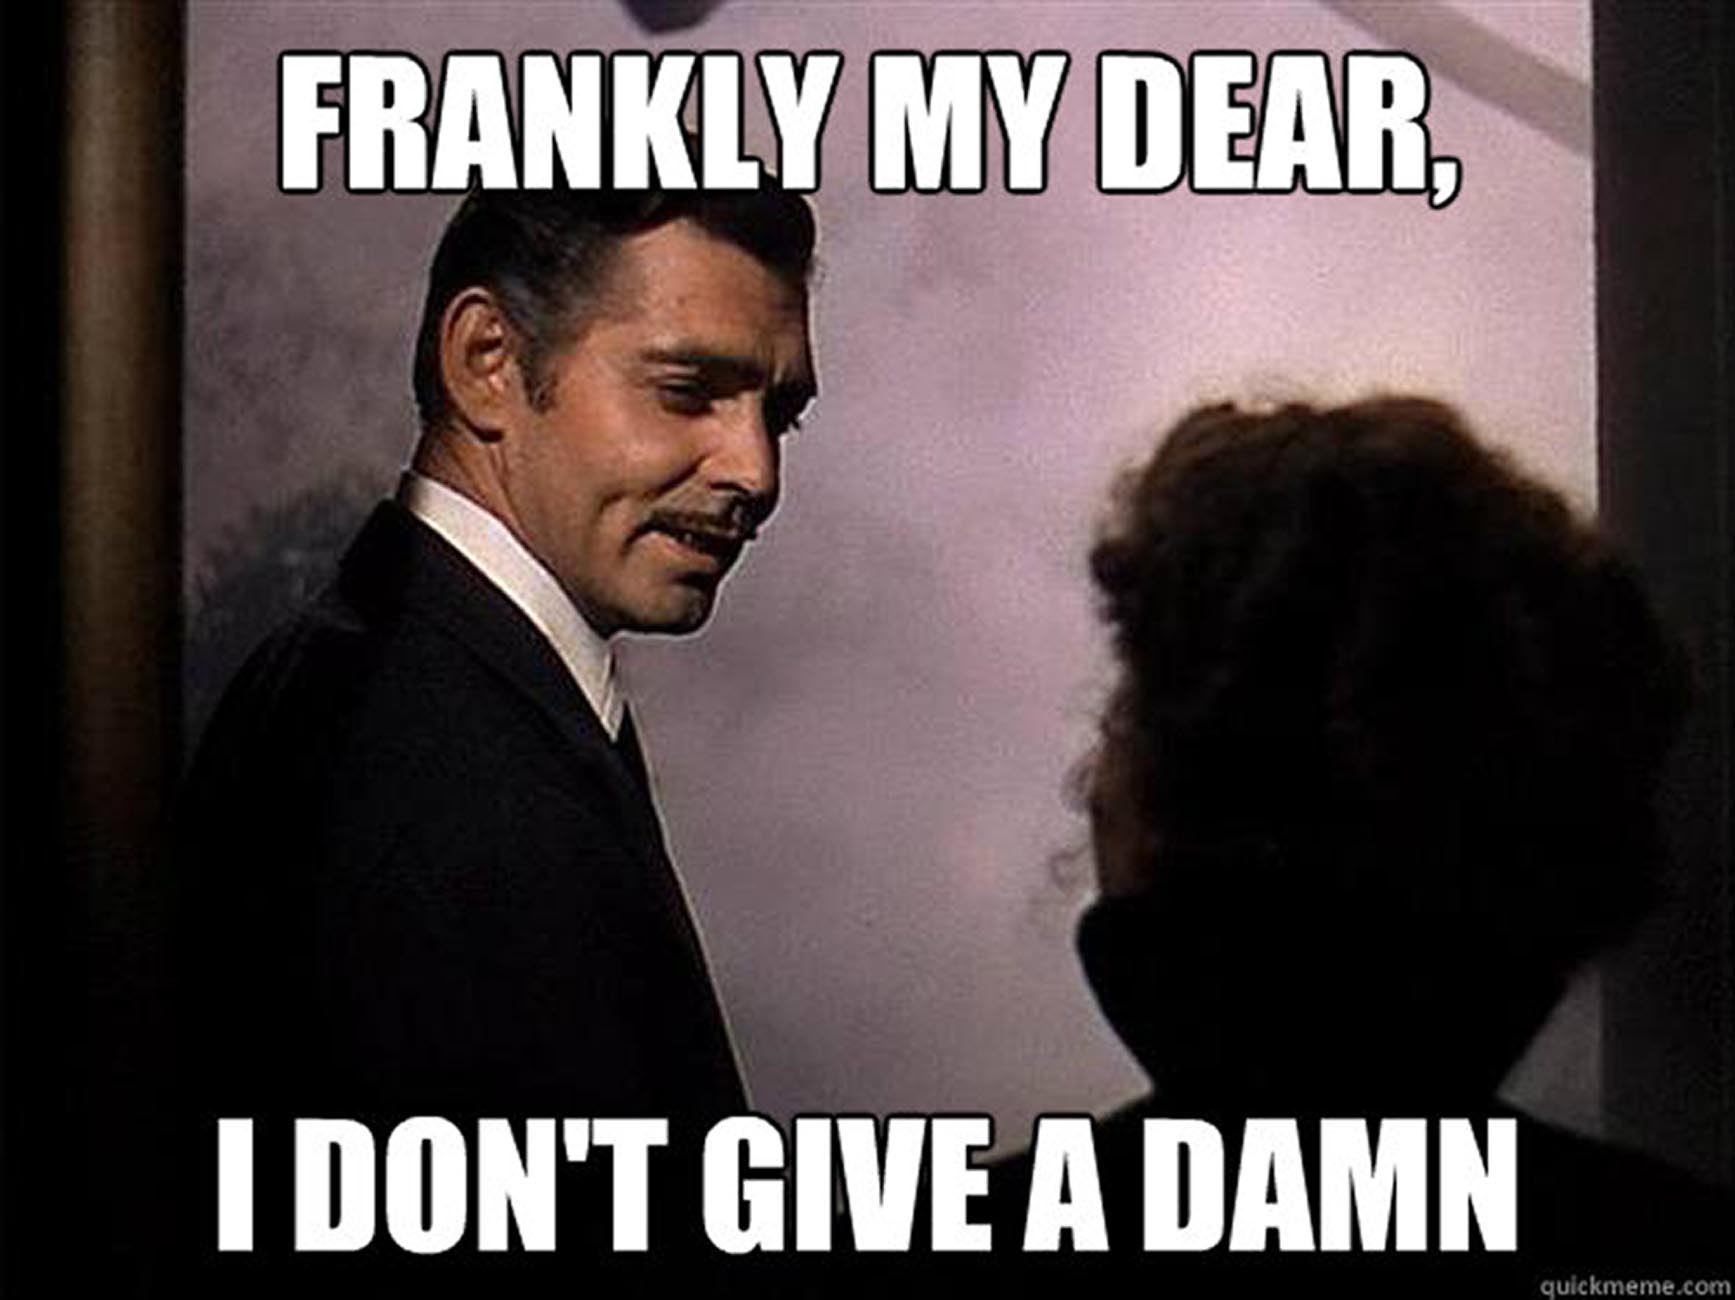 Frankly me dear, I don't give a damn